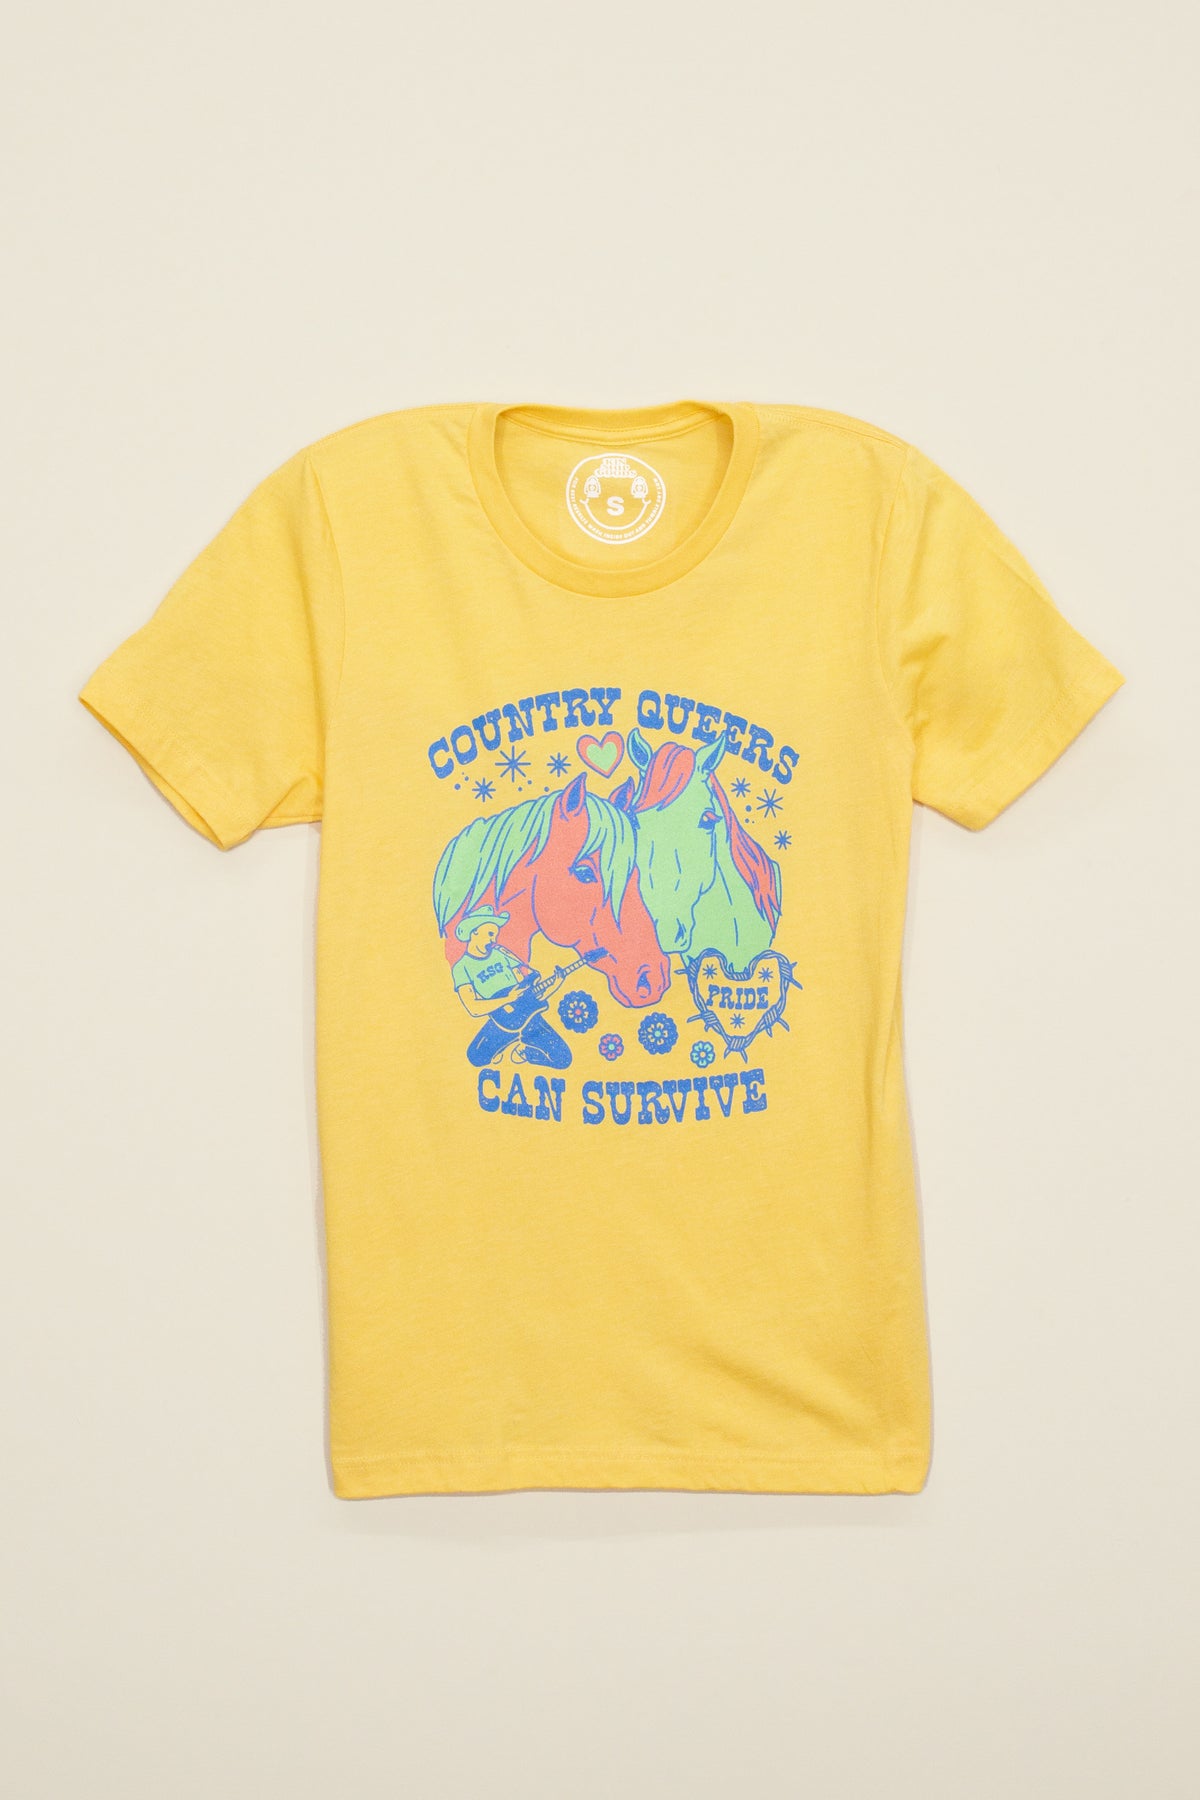 country queers can survive tee, final sale